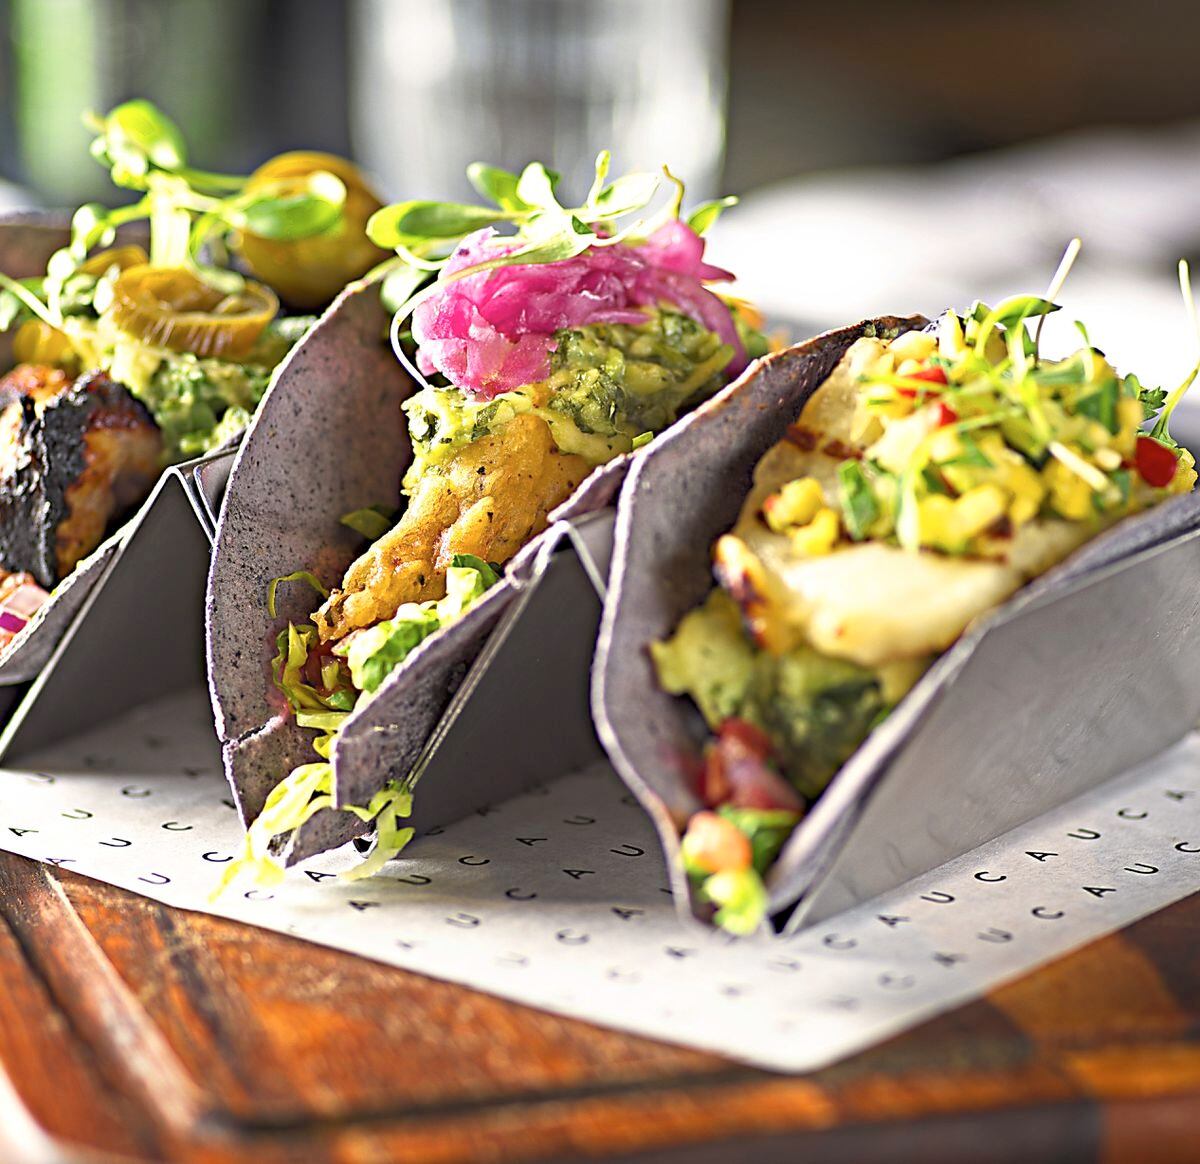 Taco your pick – the taco platter